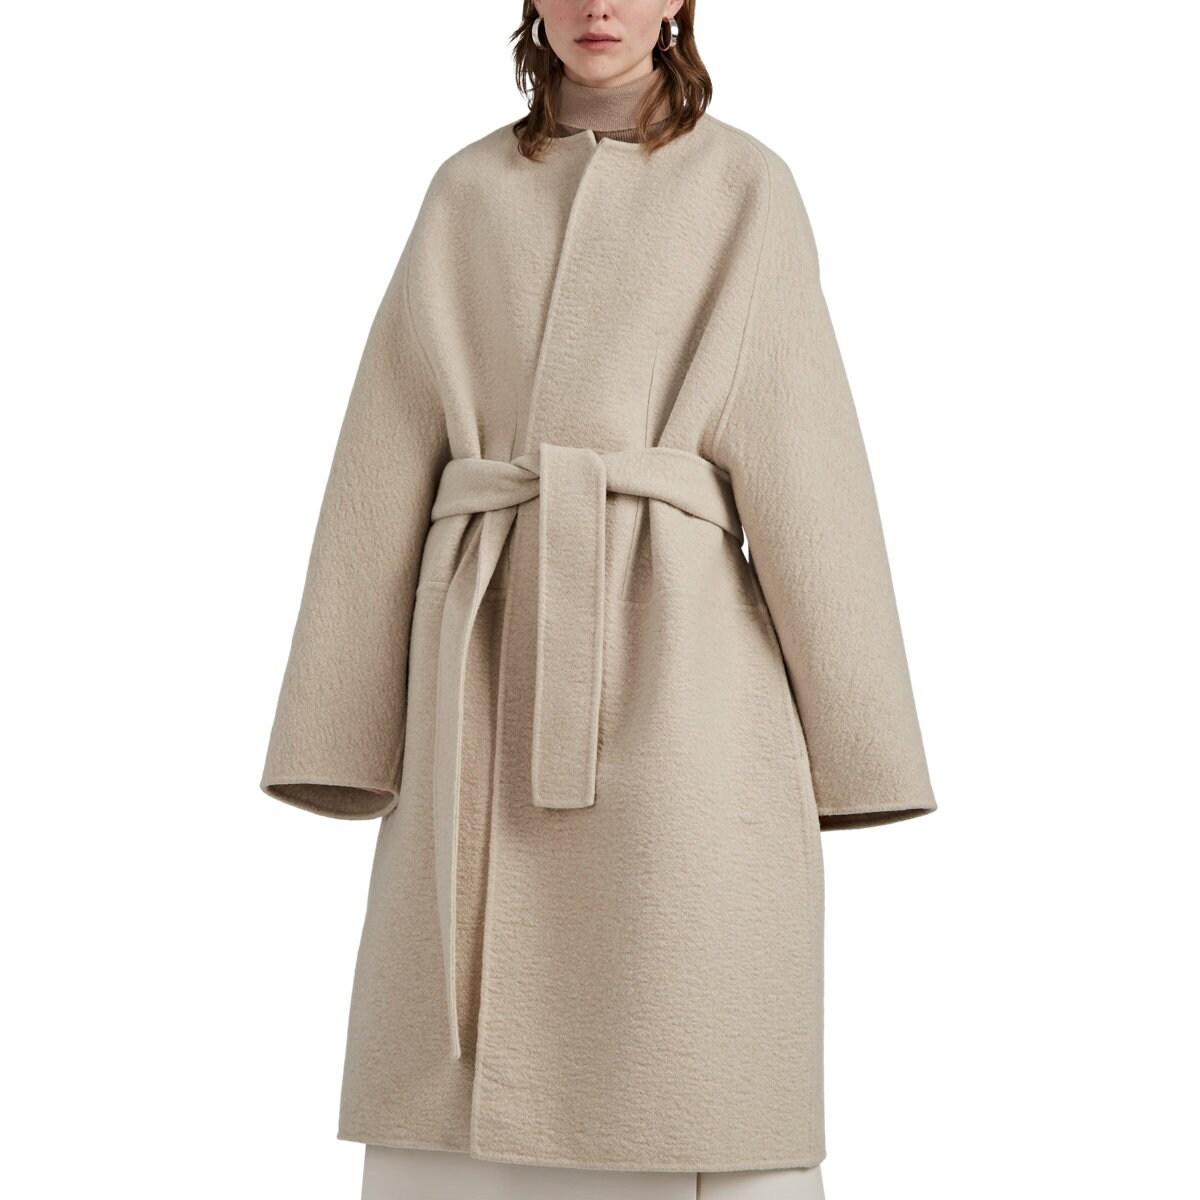 The Row Laurence Mélange Cashmere Belted Coat in Beige (Natural) - Lyst